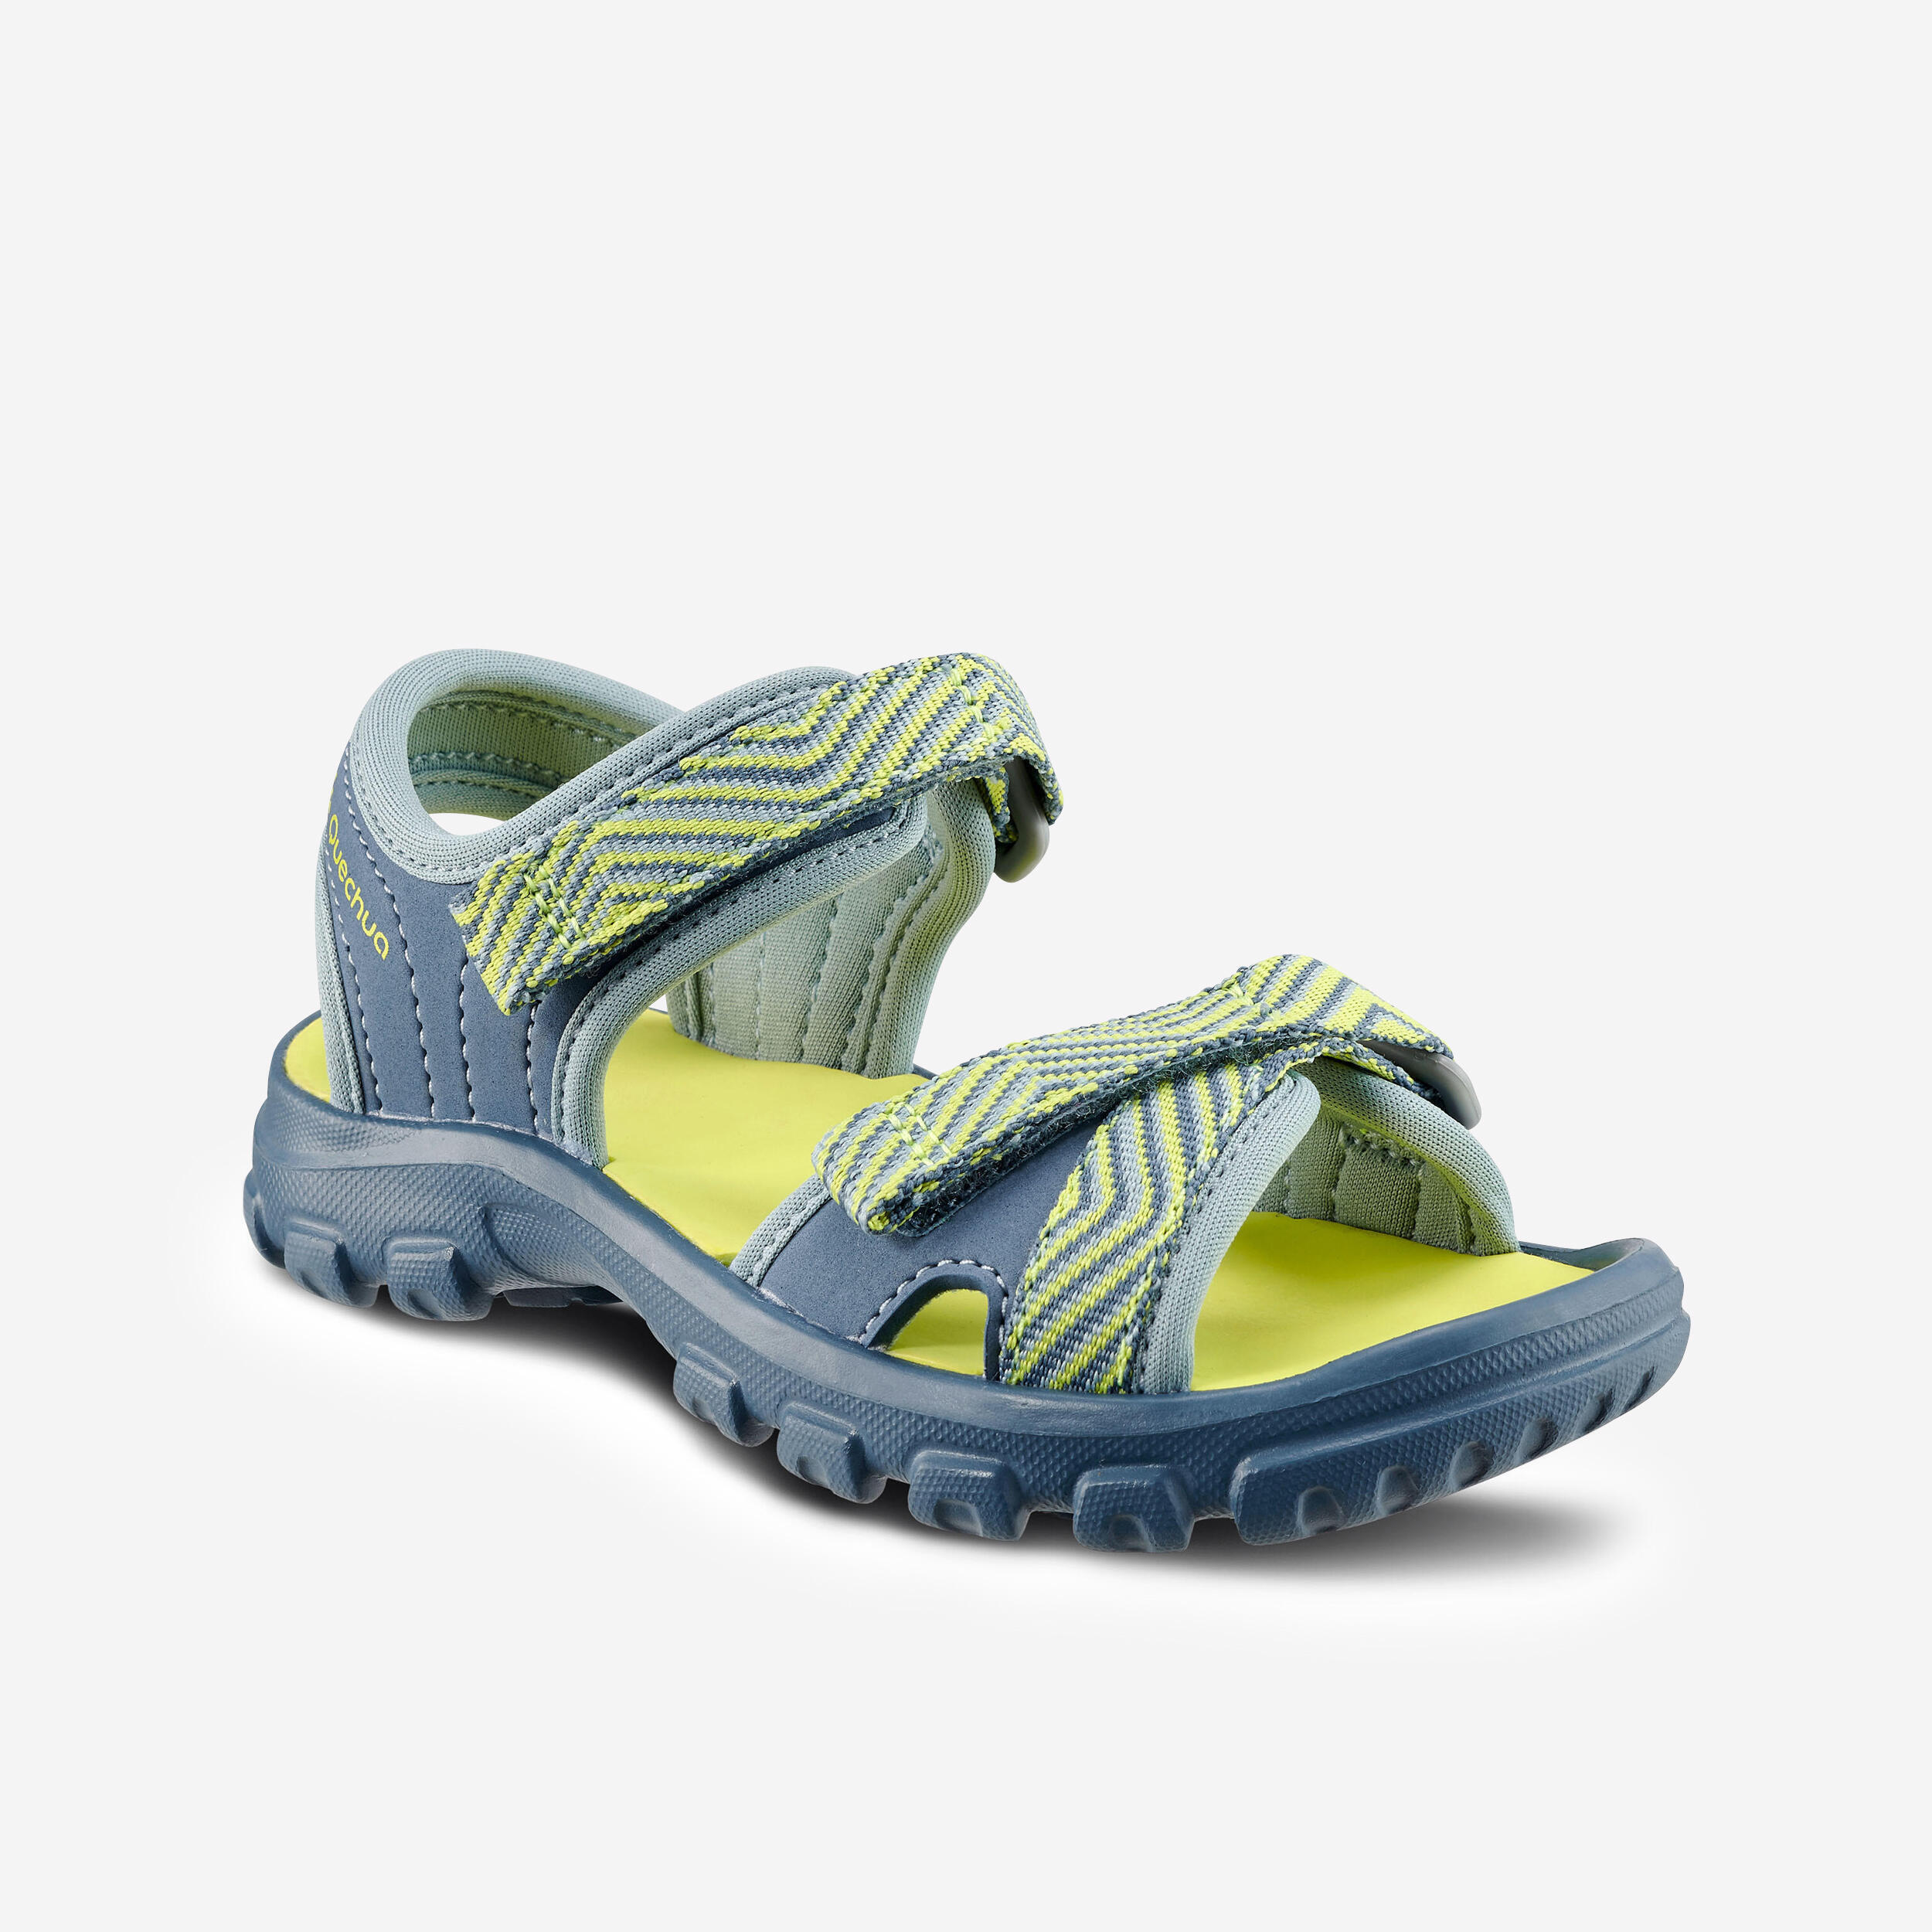 QUECHUA Kids' hiking sandals - Kids' MH100 blue and yellow - size 24 to 31